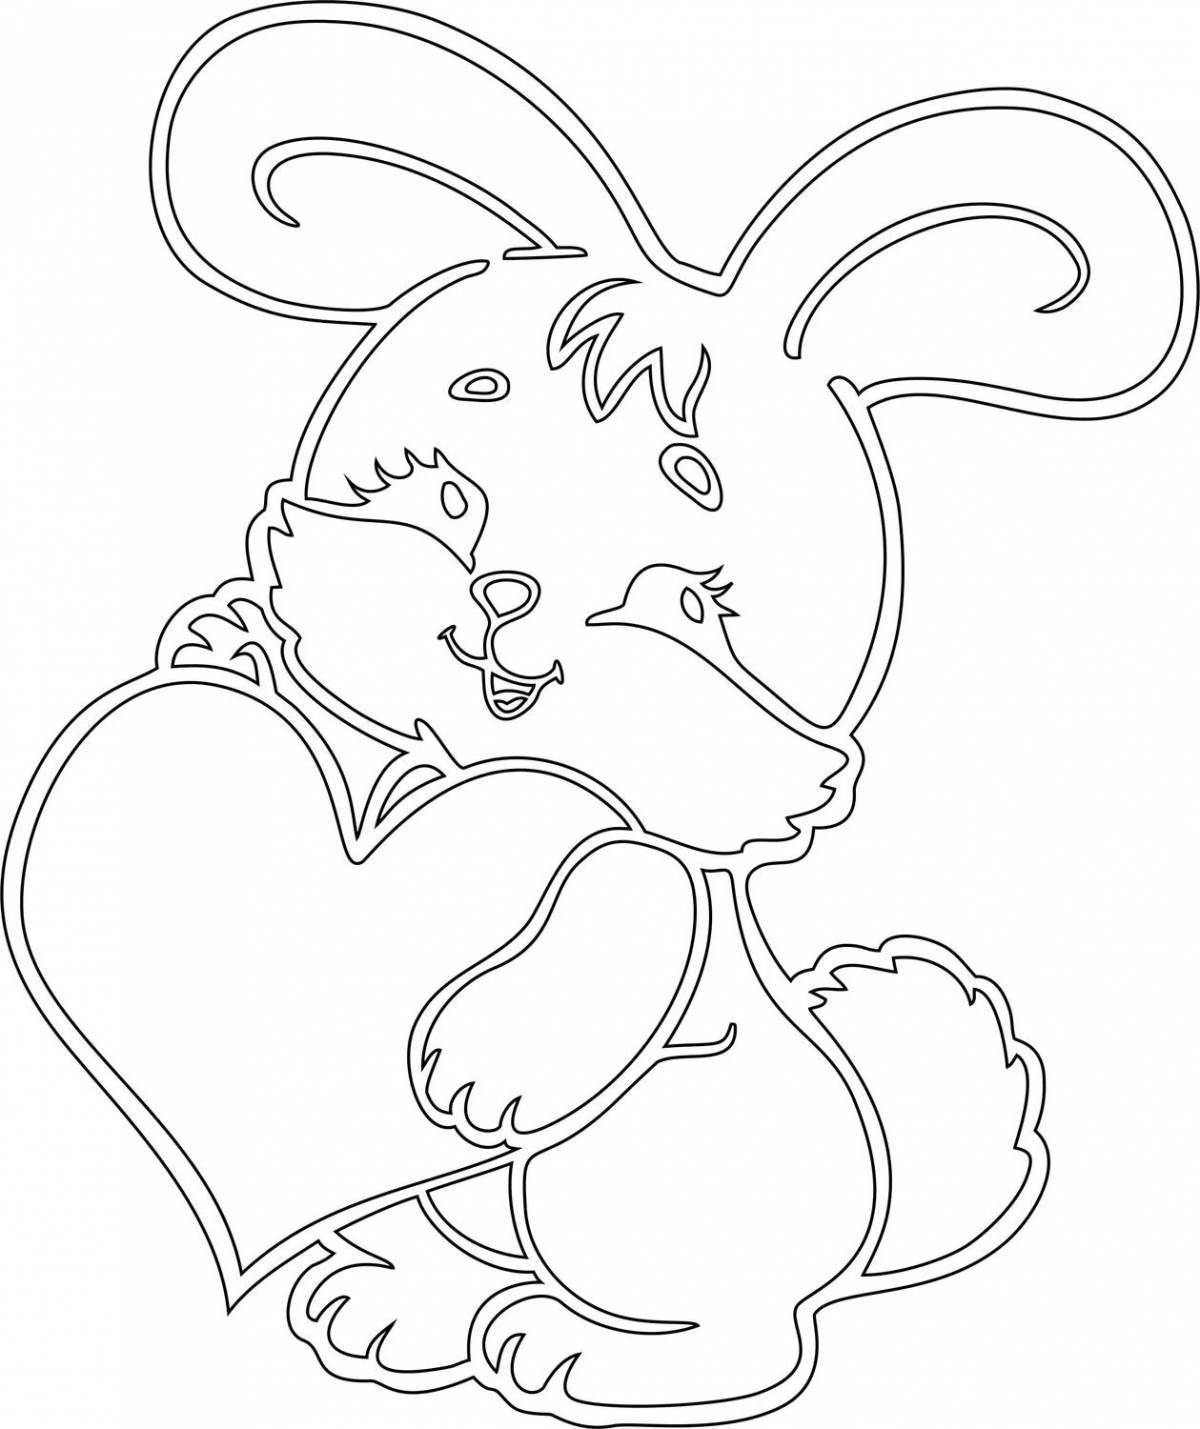 Snuggly coloring page bunny with a heart